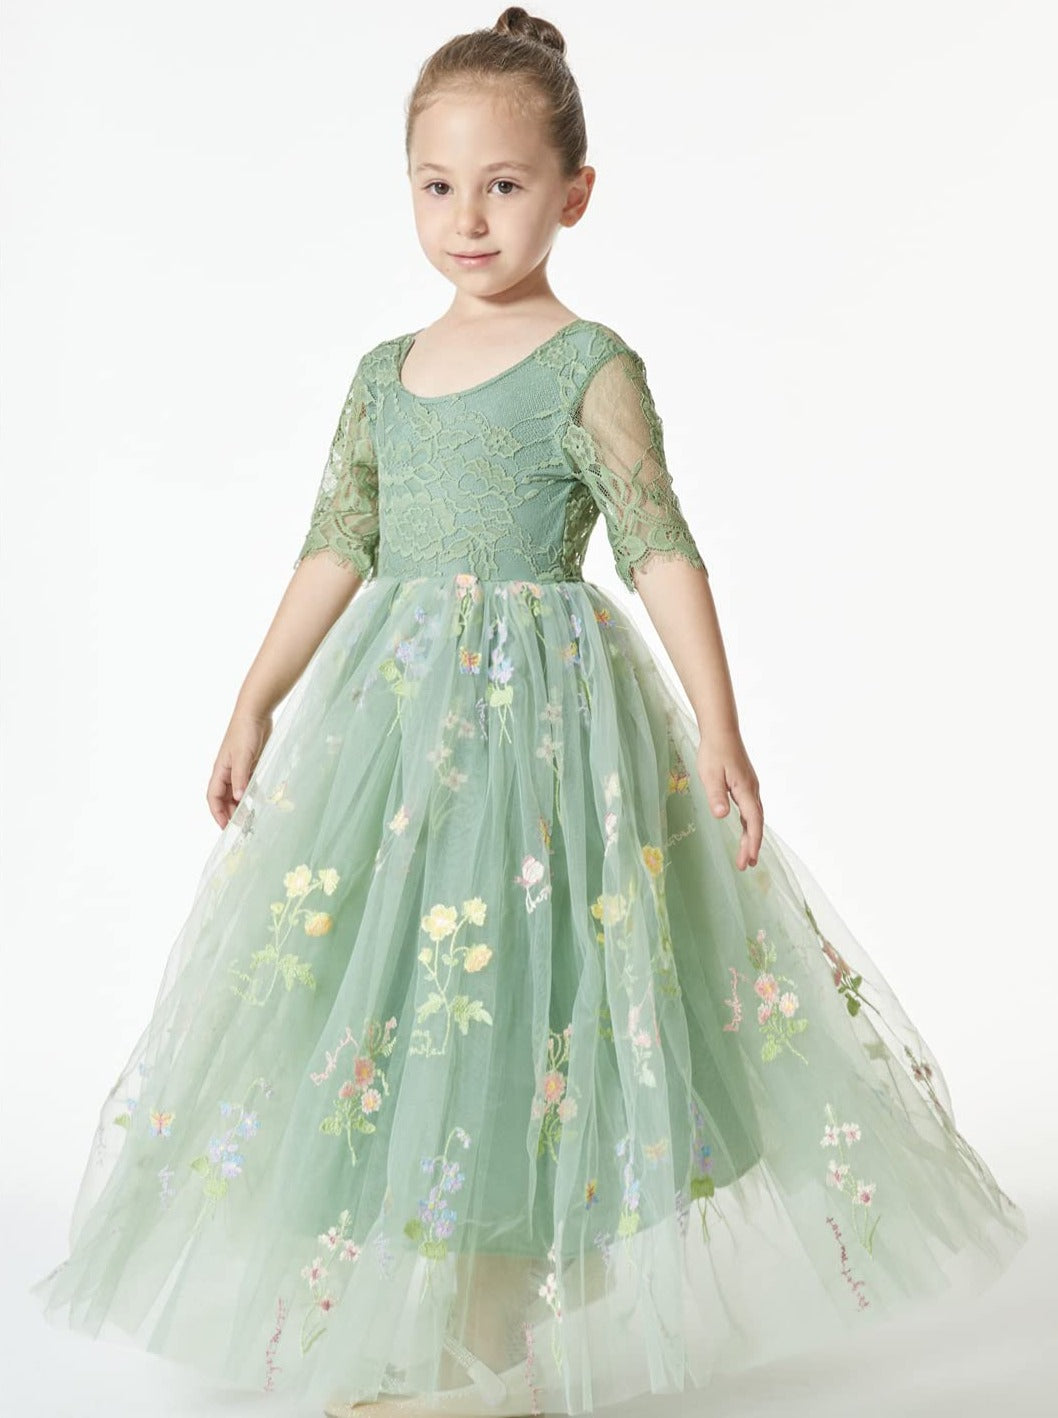 Floral Embroidered Tulle Garden Lace Girl Dress in Sage